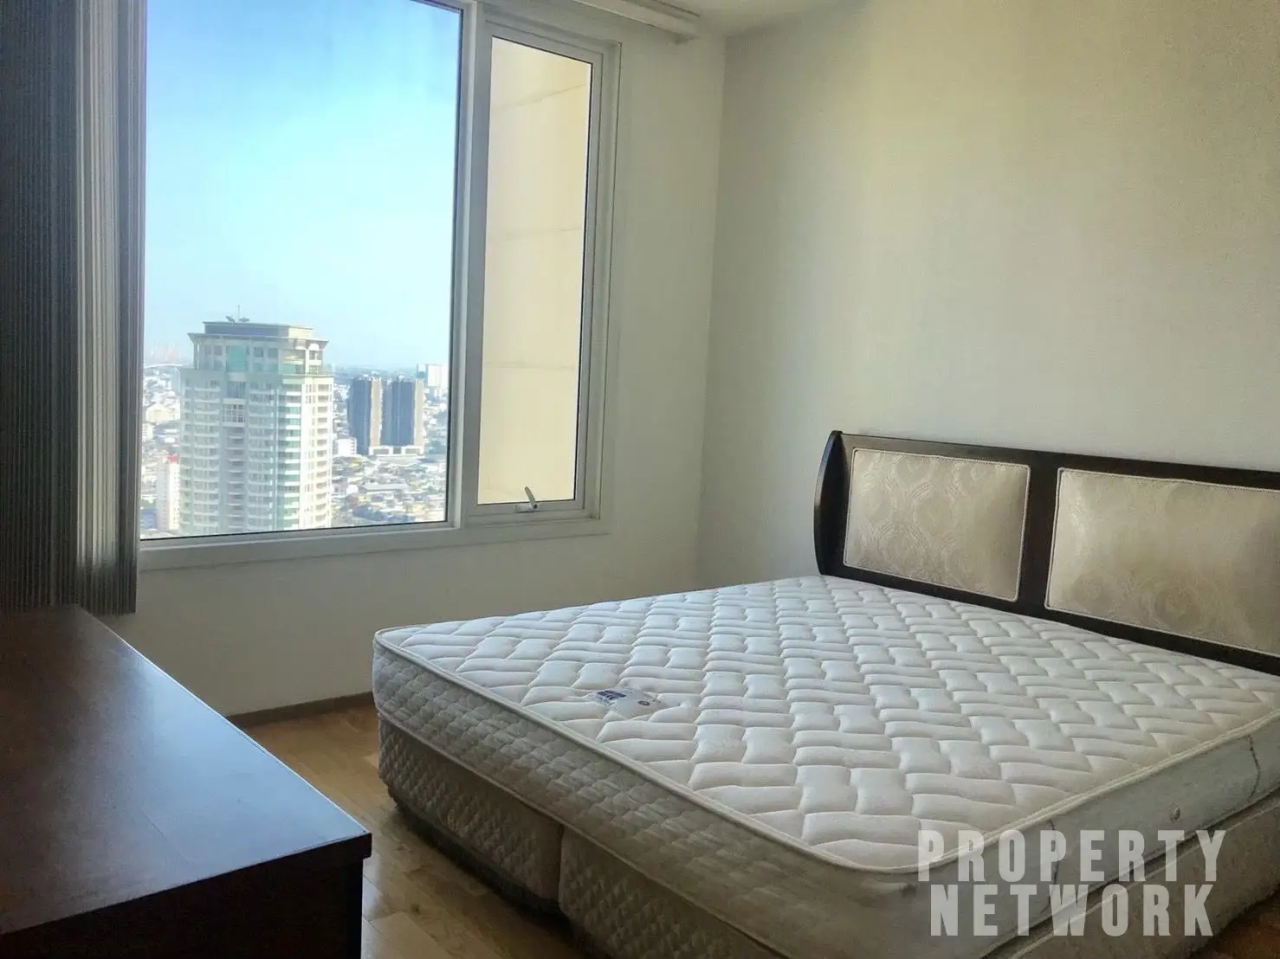 1 Bedroom 1 Bathroom Size 65sqm The Empire Place For Rent 30,000 THB For Sale 8,800,000 MB